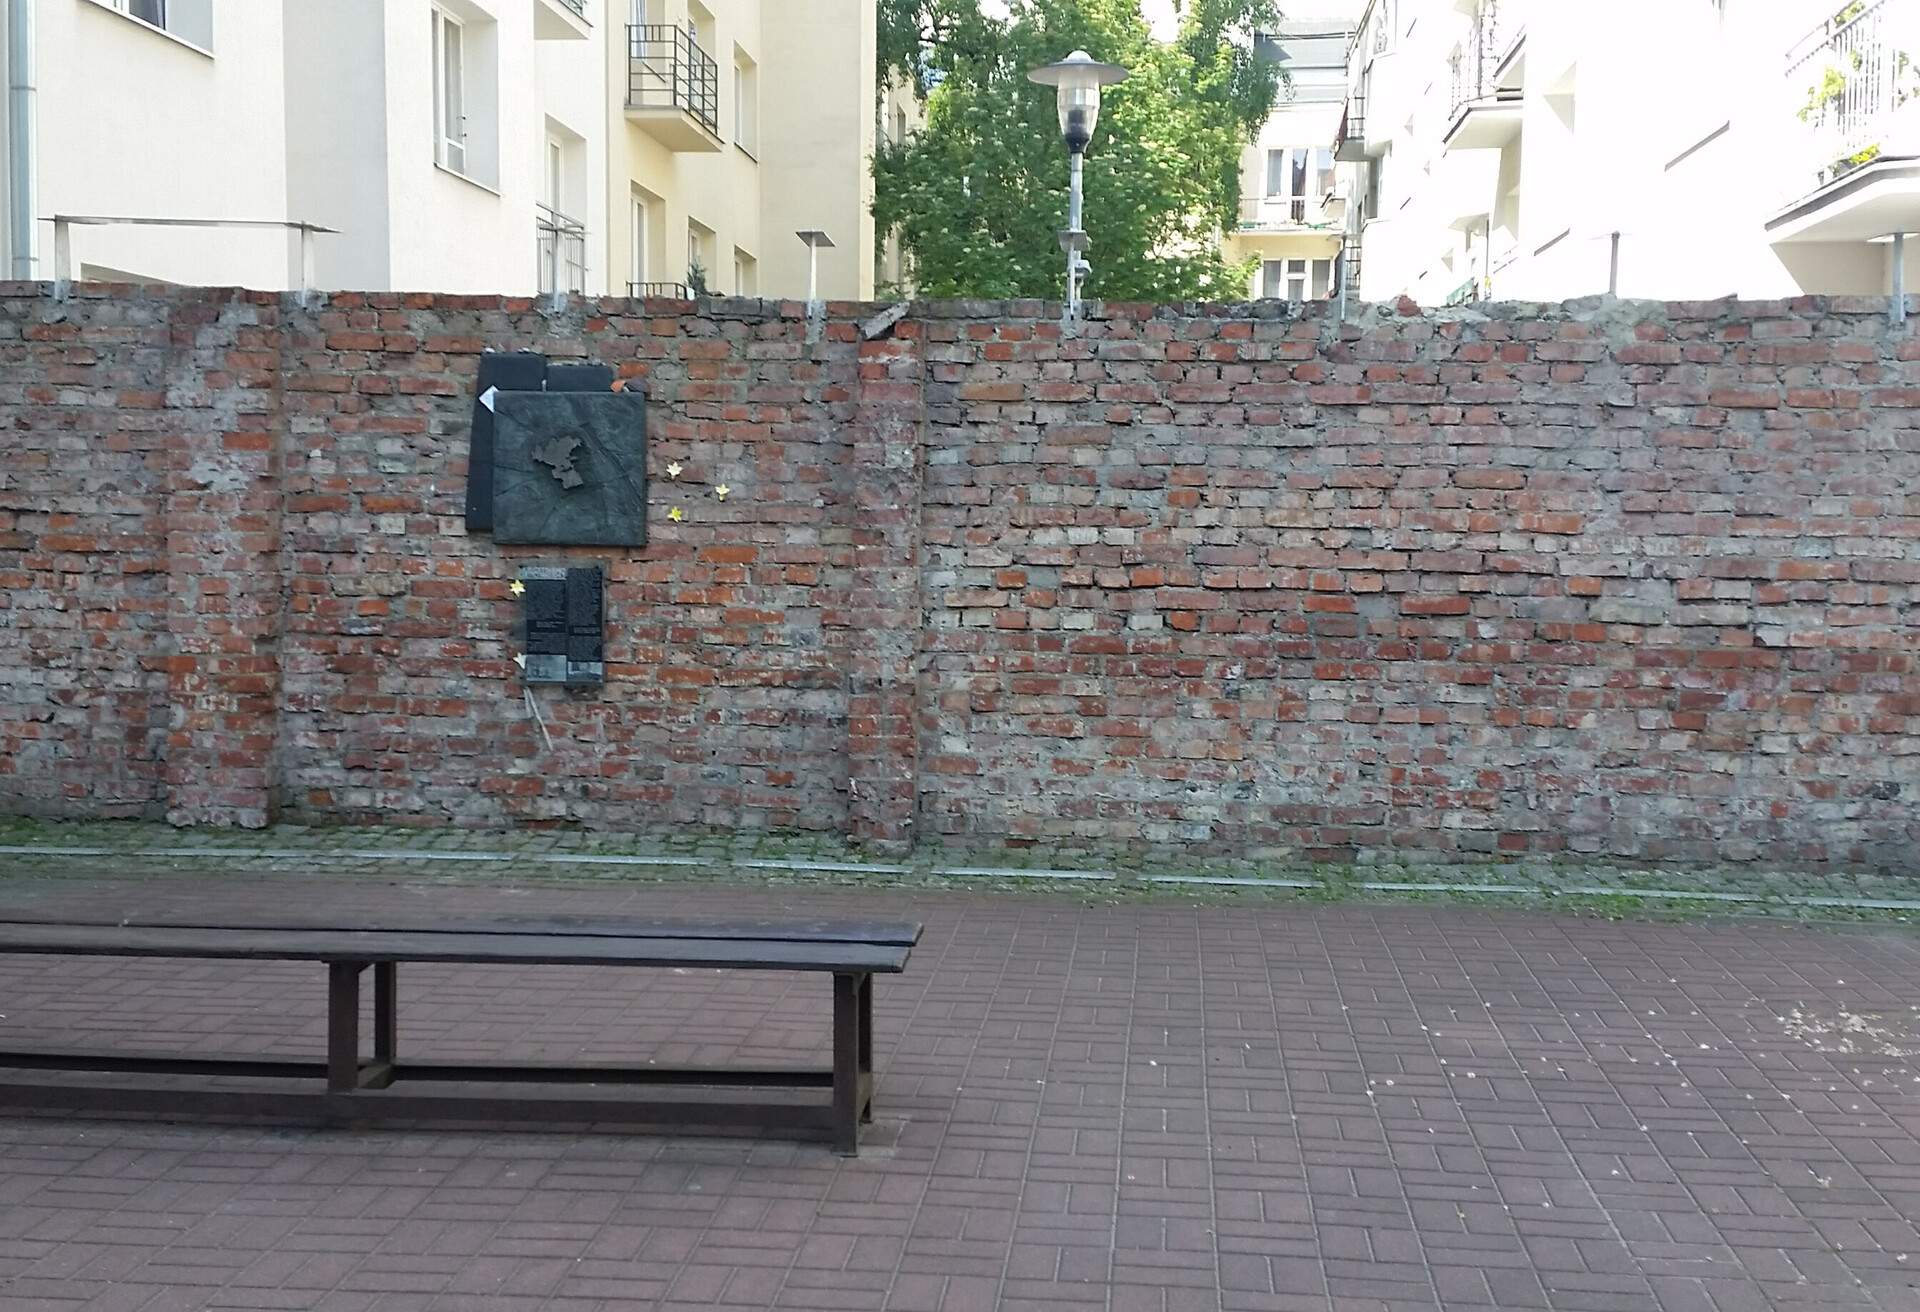 A wall FROM the Warsaw ghetto